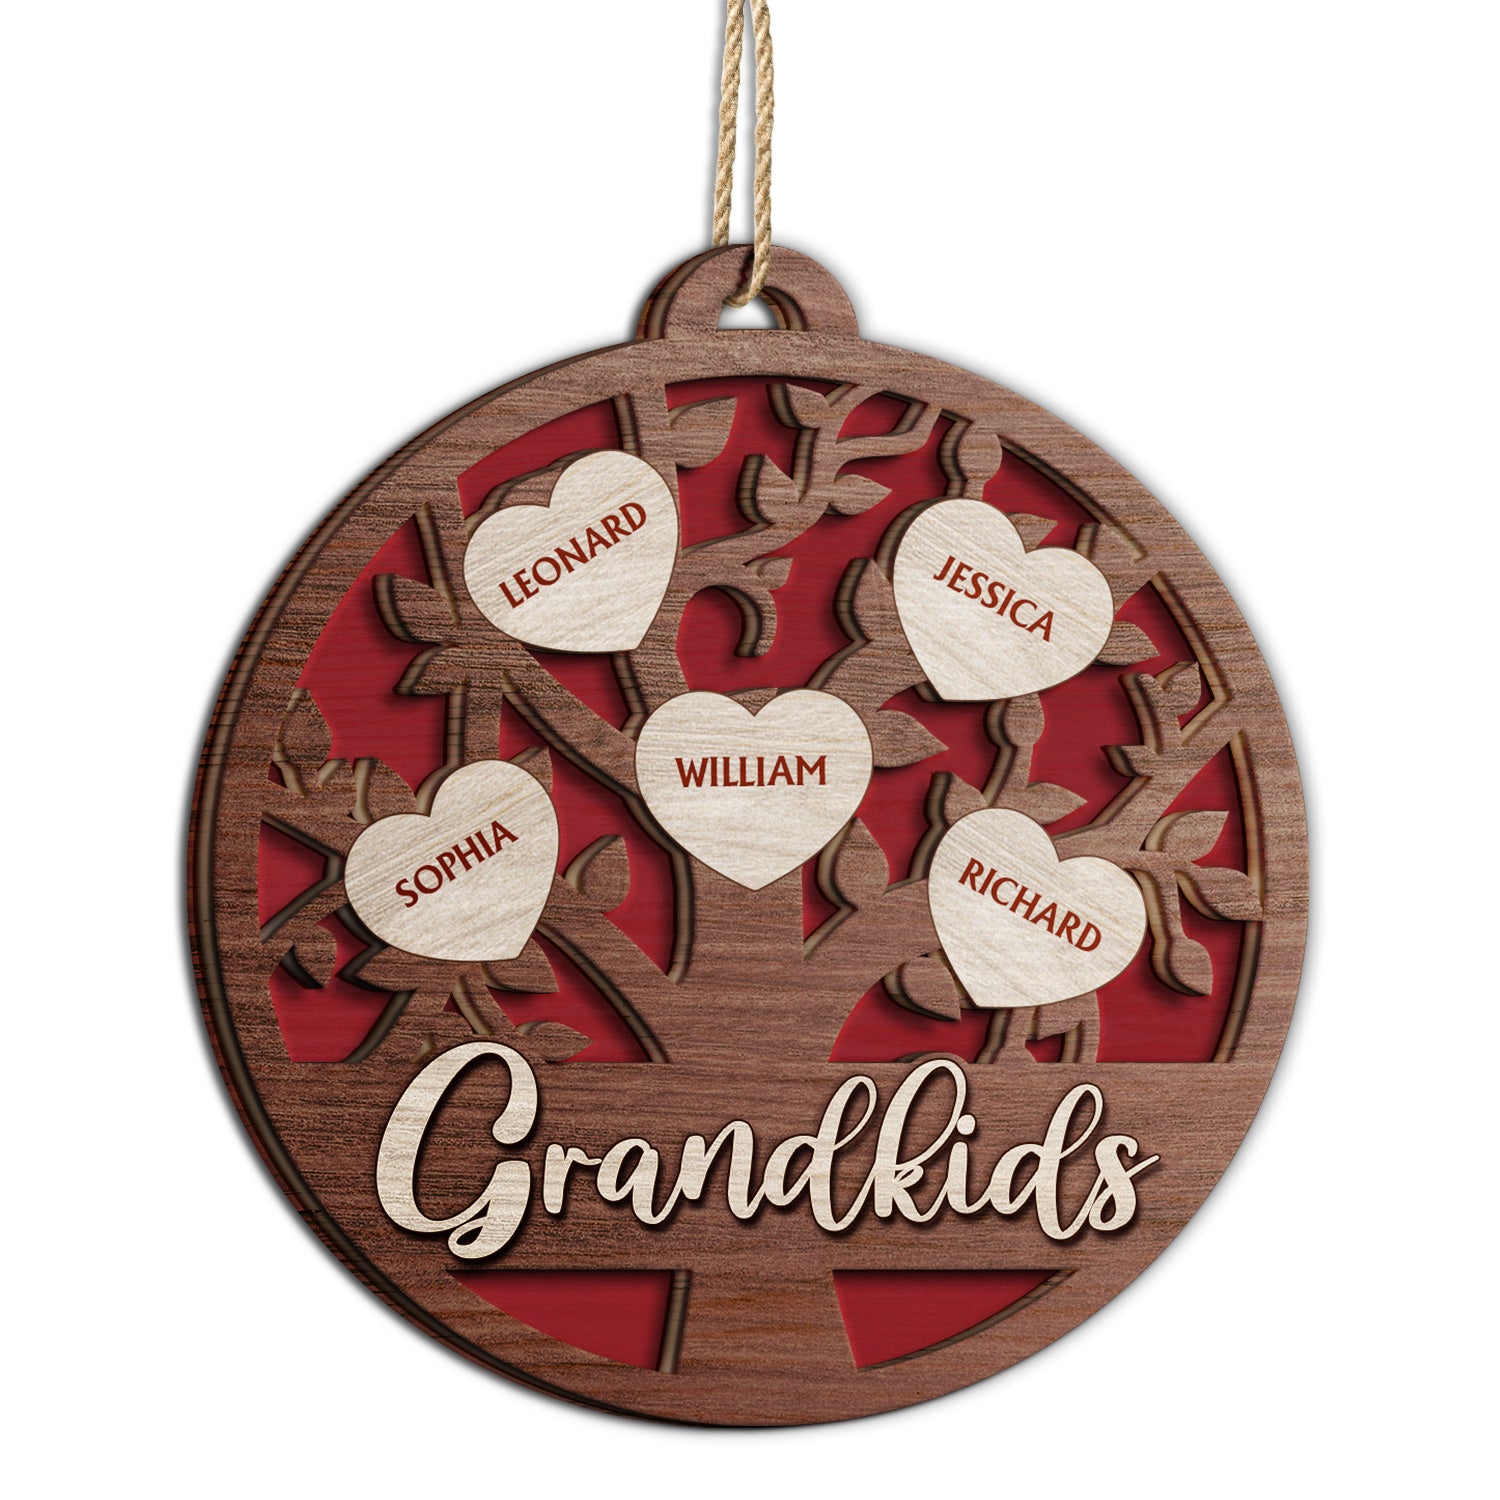 Grandkids Family Tree - Christmas Gifts For Grandparents, Grandkids, Family - Personalized 2-Layered Wooden Ornament